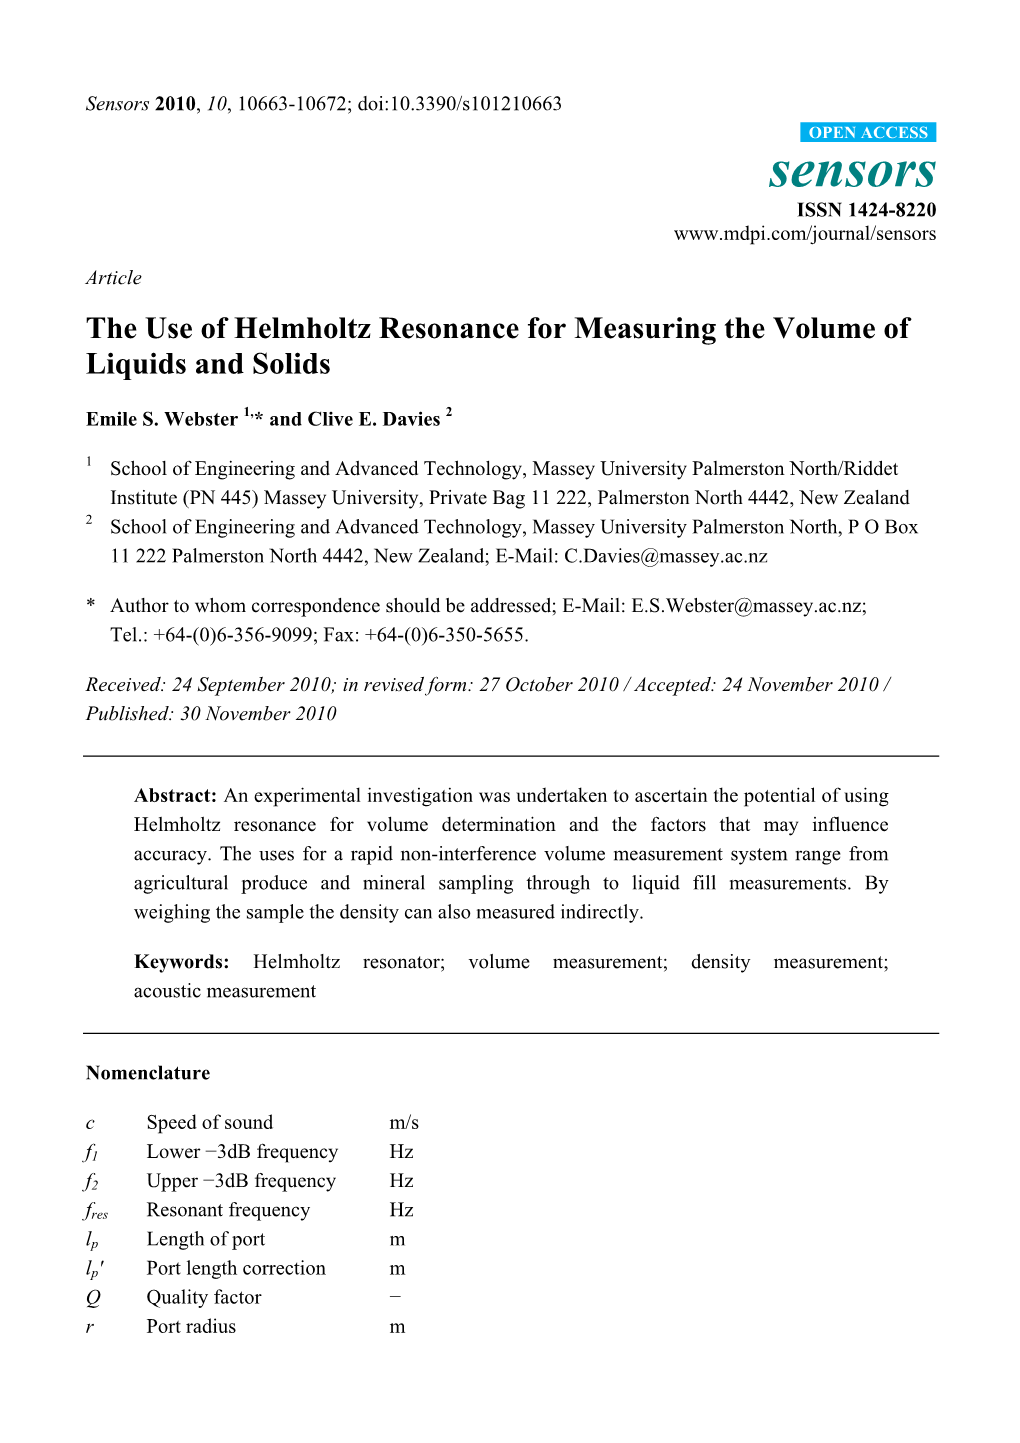 The Use of Helmholtz Resonance for Measuring the Volume of Liquids and Solids